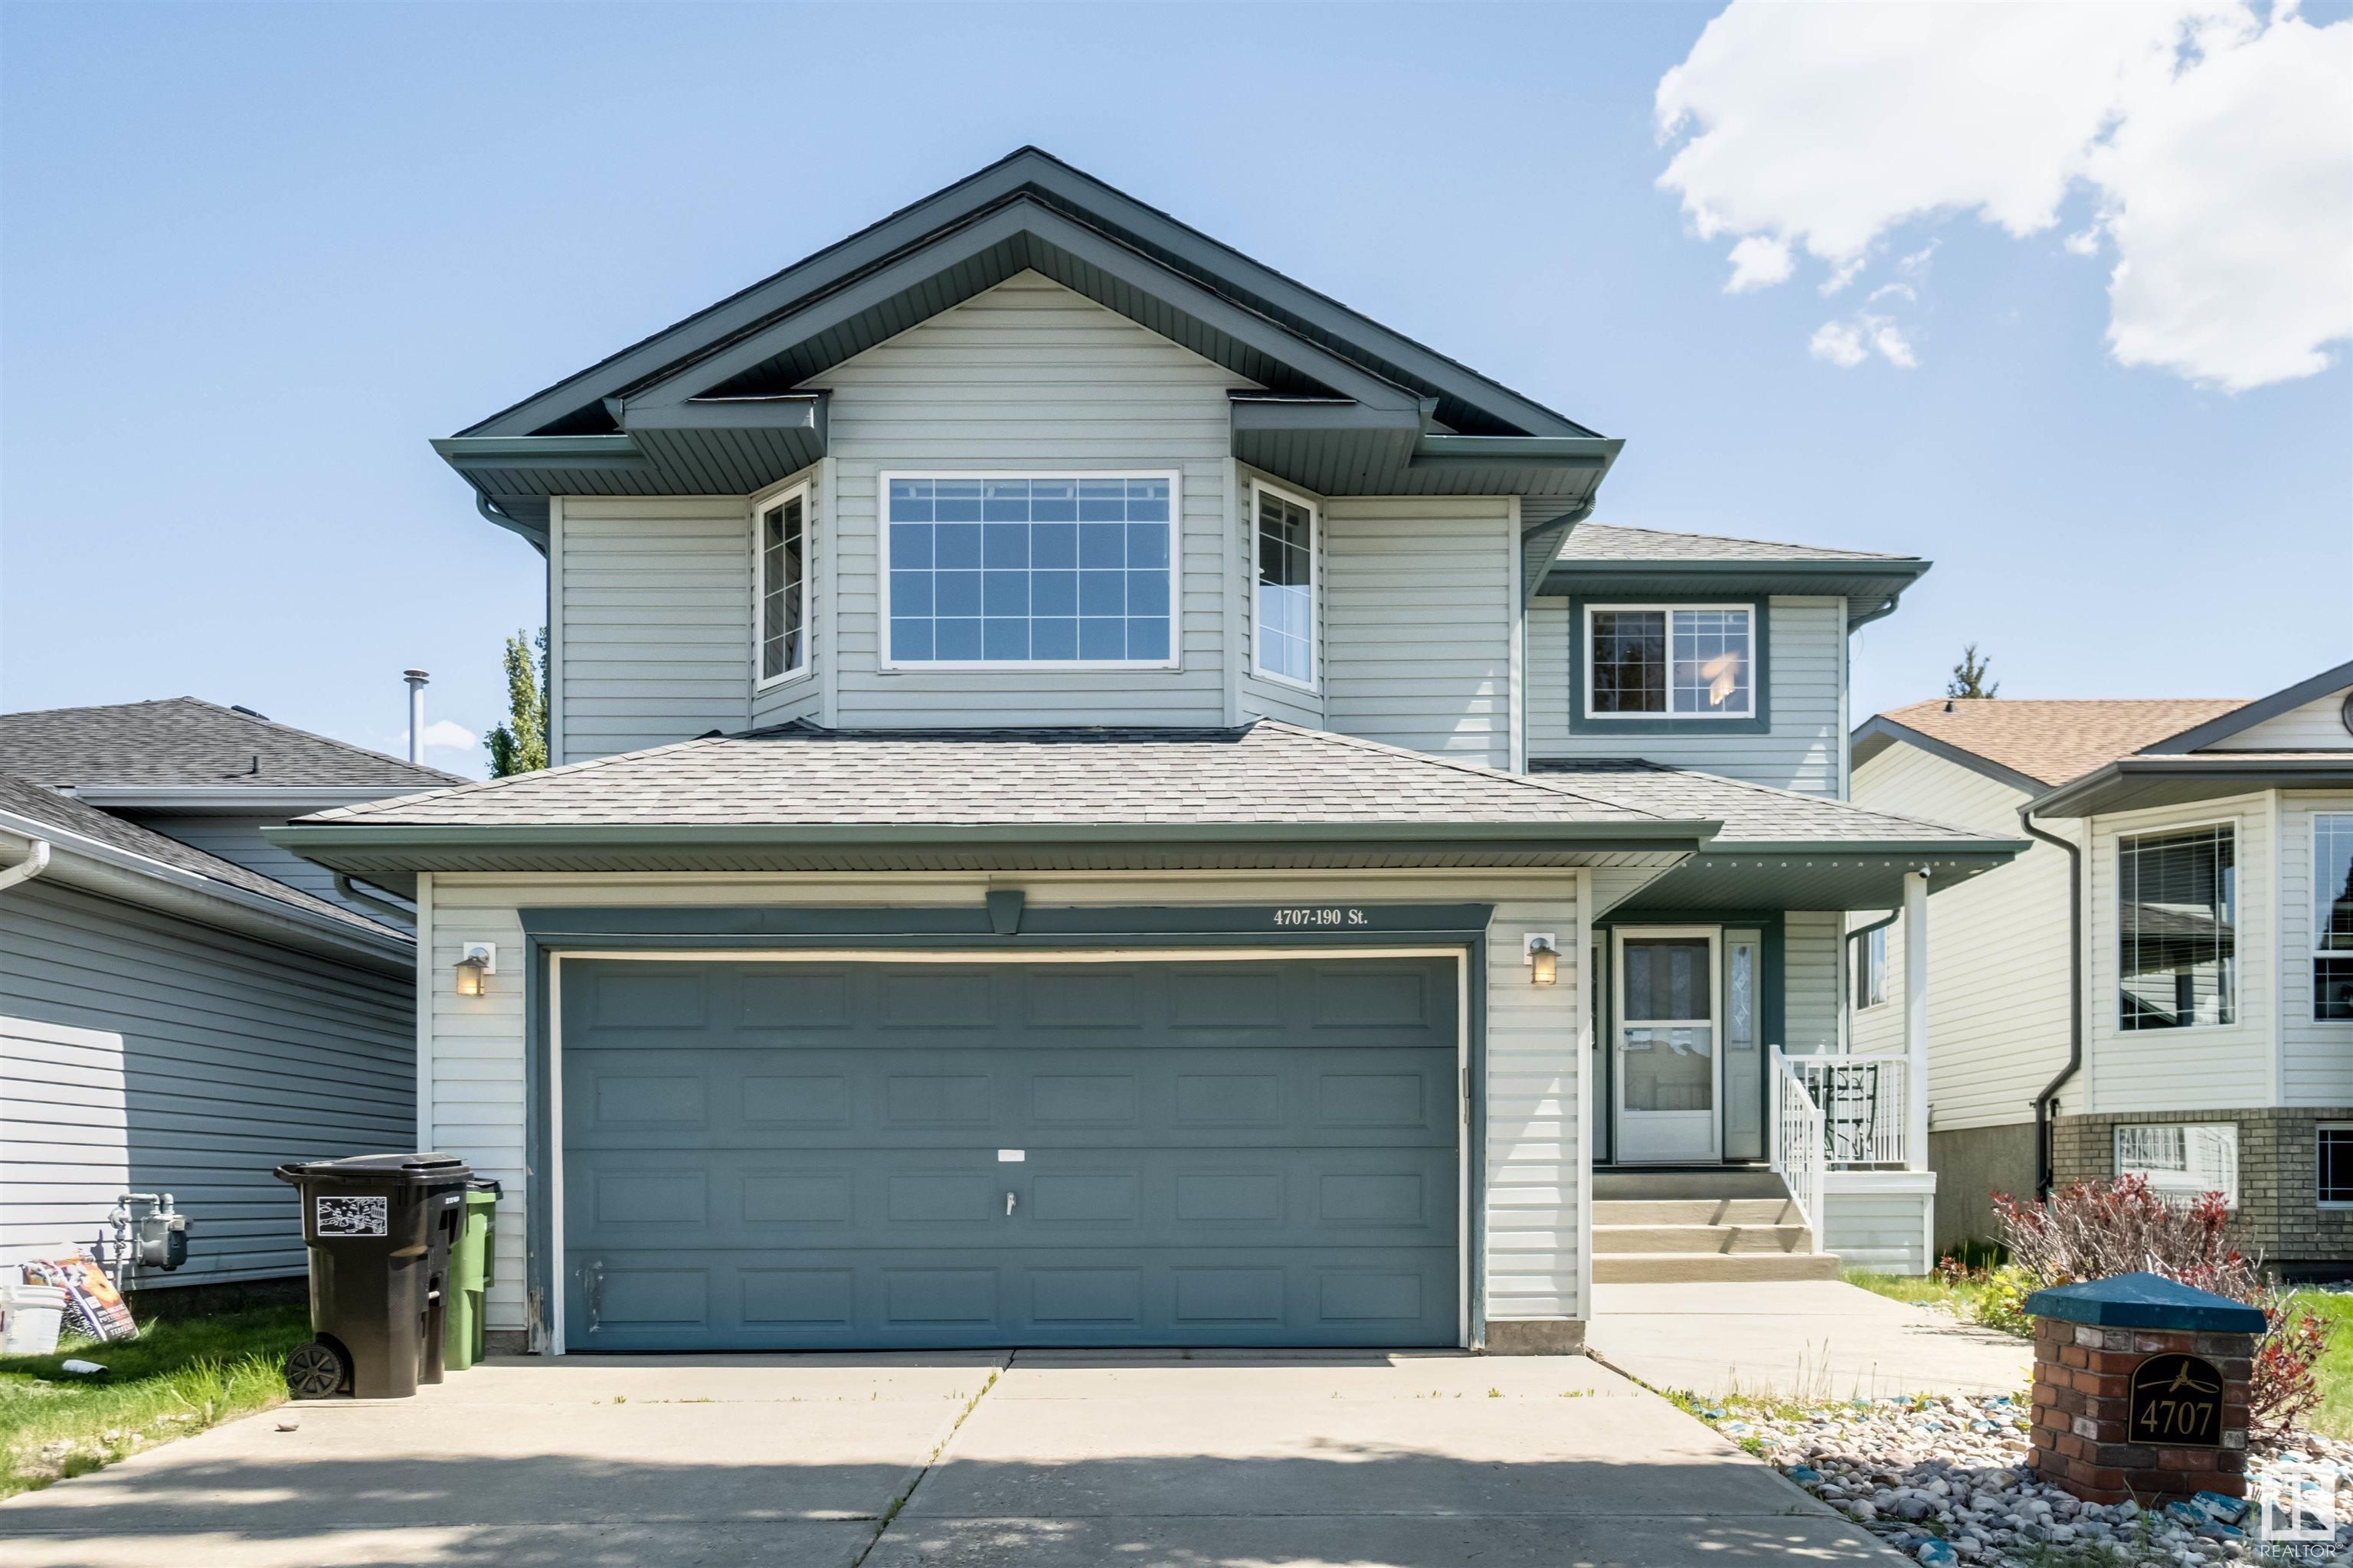 Main Photo: 4707 190 Street NW in Edmonton: Zone 20 House for sale : MLS®# E4299021